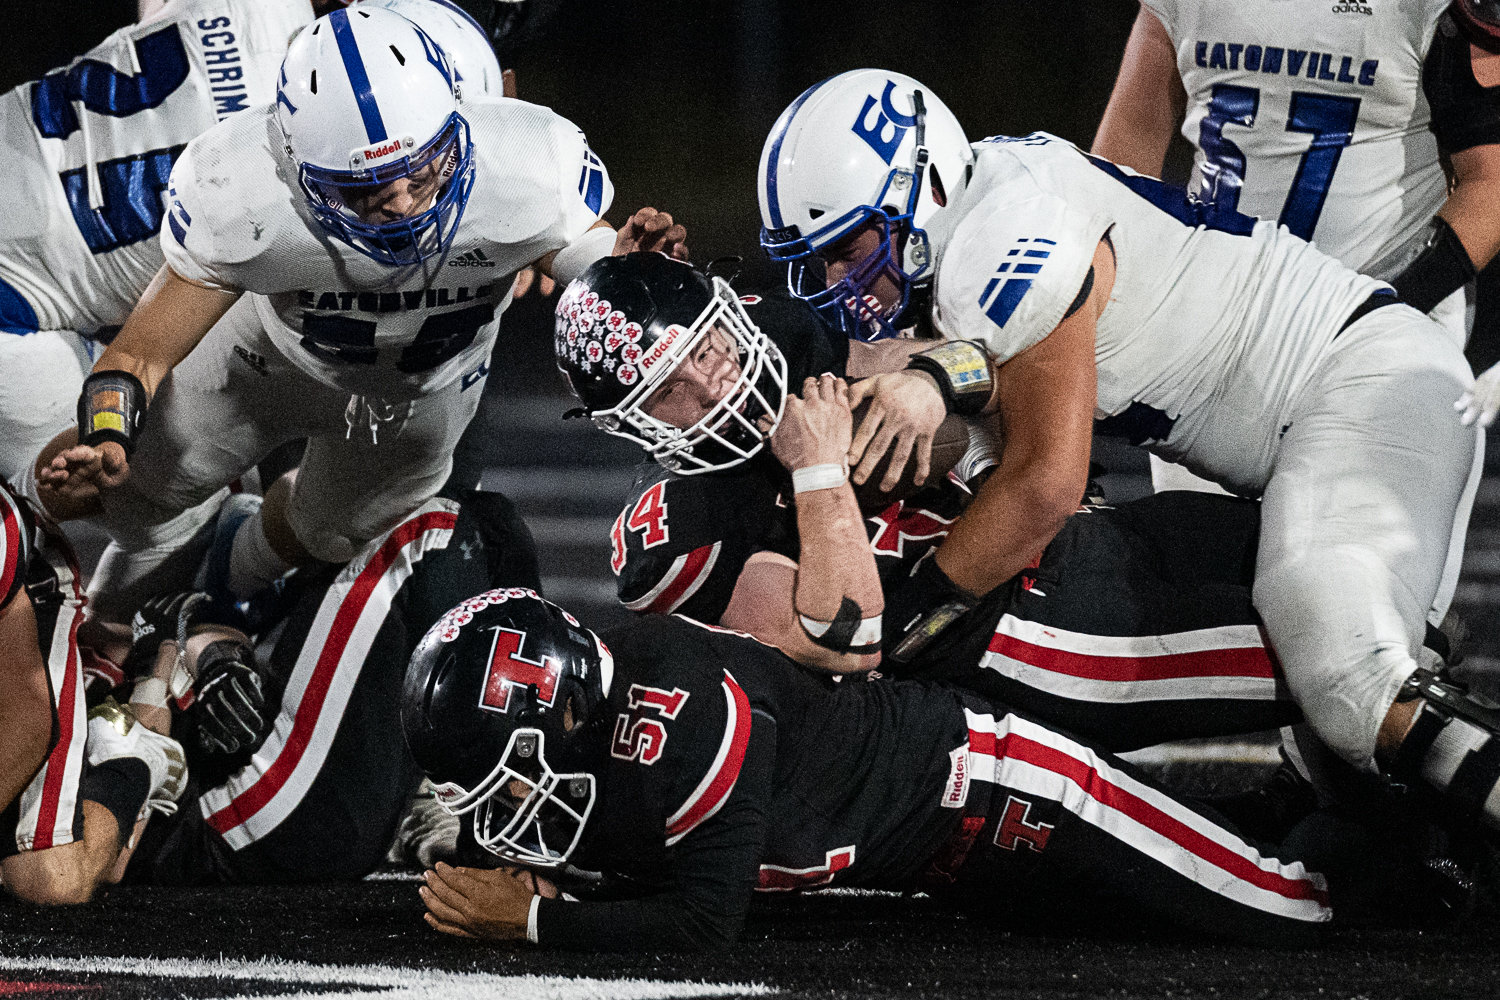 Tenino's Randy Marti fights for extra yards against Eatonville Sept. 30 on the Black Top.